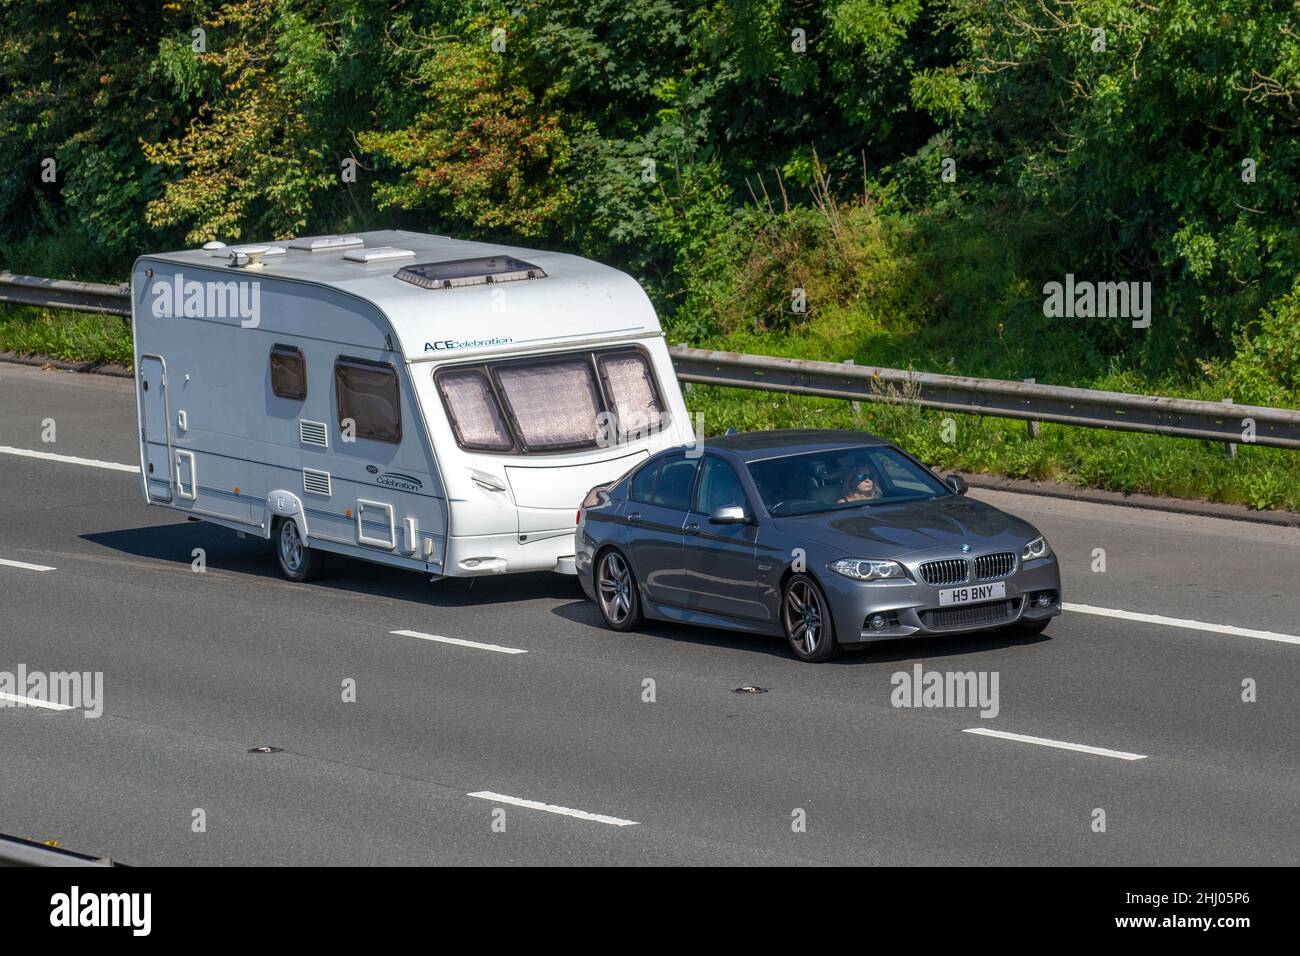 2013 grey BMW 520 520D 1995cc 8 speed automatic towing ACE Celebration caravan; Caravans and Motorhomes, campervans on Britain's roads, RV leisure vehicle, family holidays, caravanette vacations, Touring caravan holiday, van conversions, Vanagon autohome, life on the road, motor caravan Stock Photo